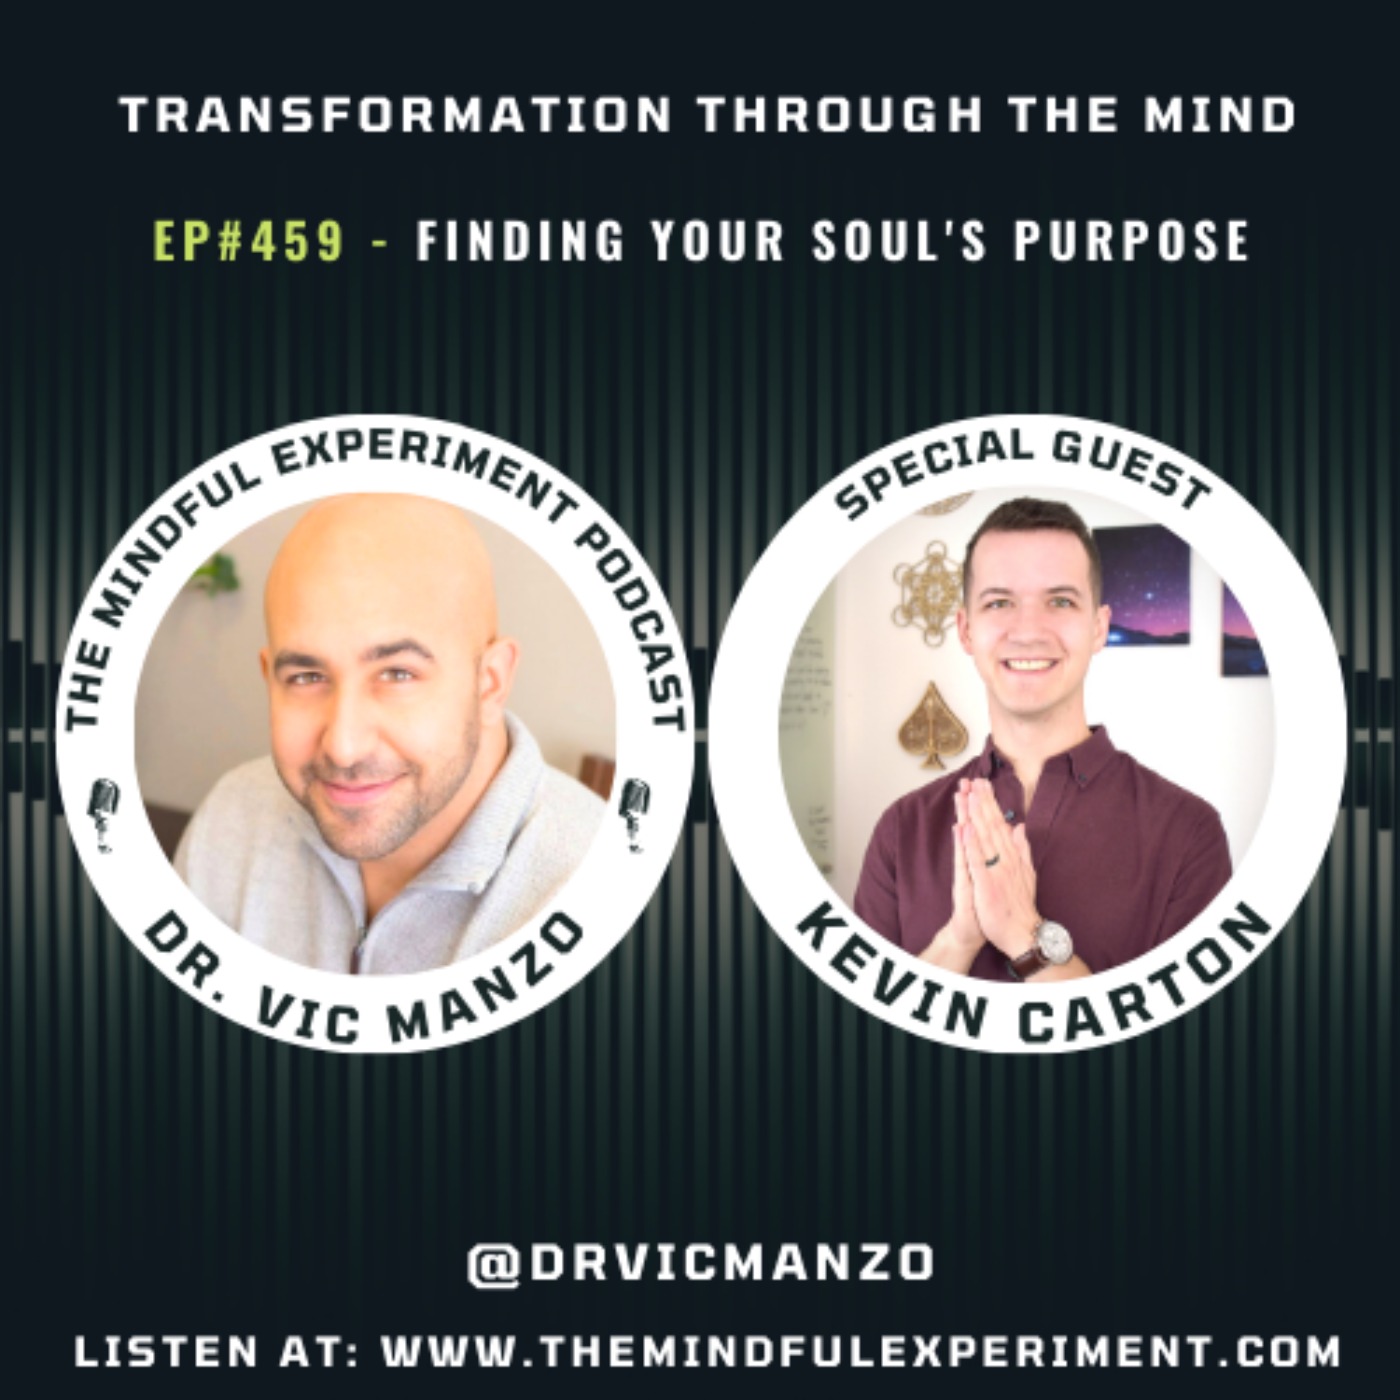 EP#459 - Finding Your Soul’s Purpose with Guest: Kevin Carton